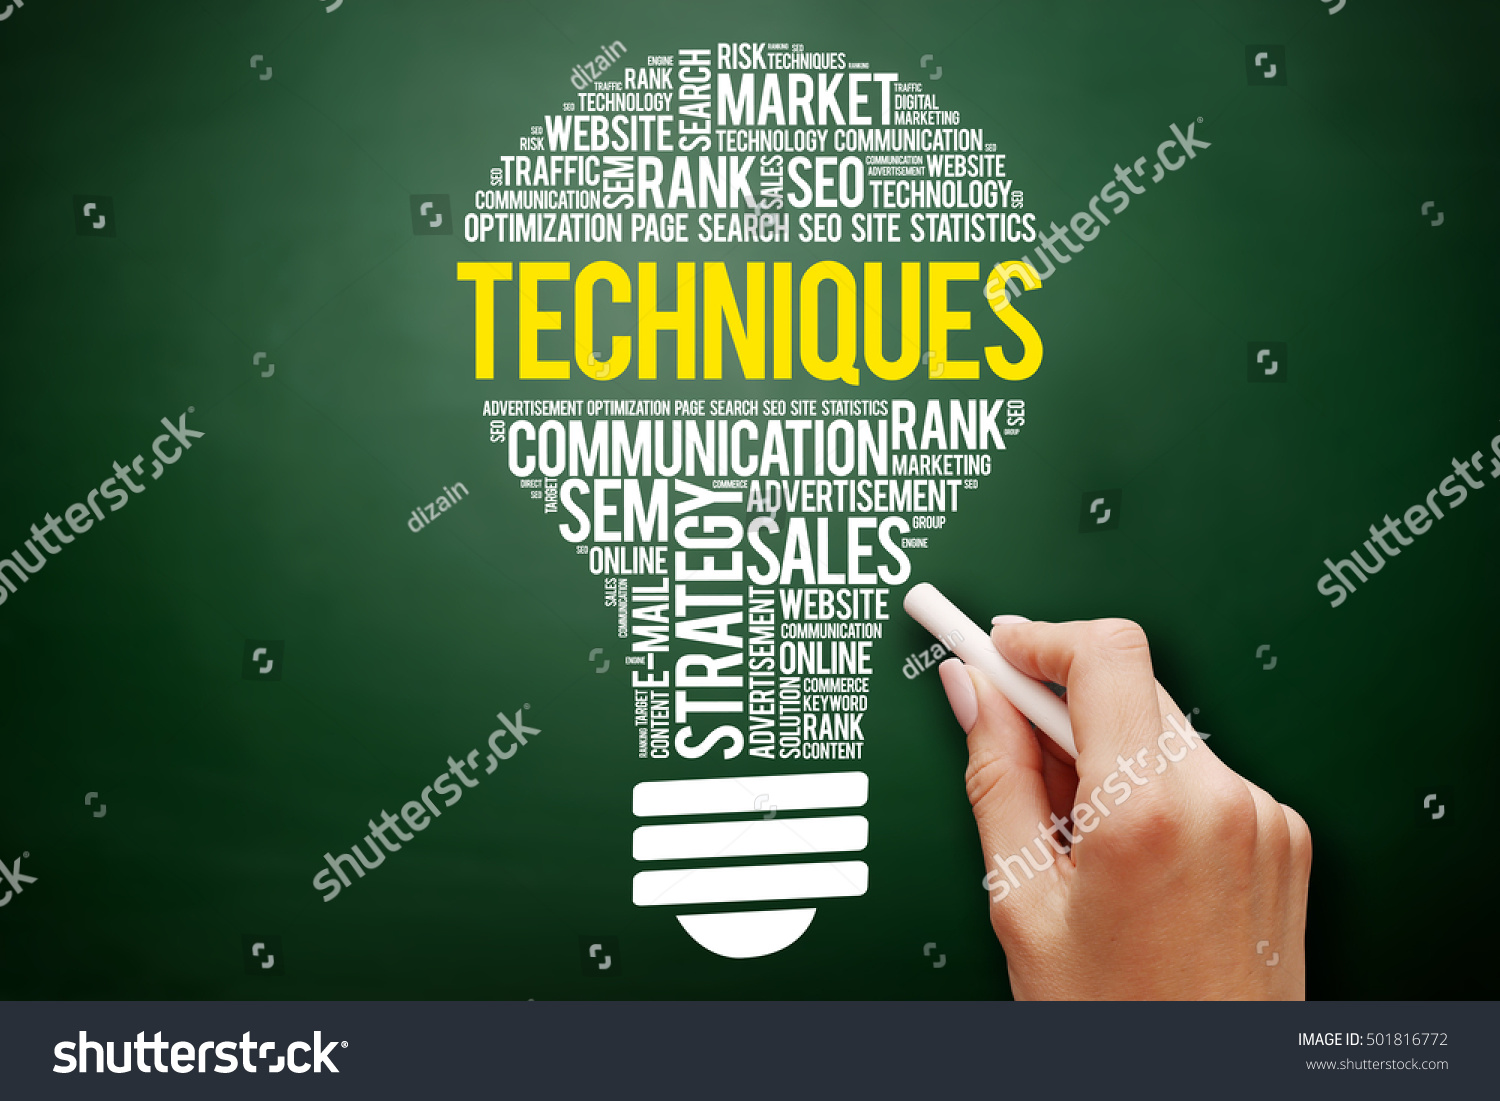 Techniques bulb word cloud collage, business concept on blackboard #501816772